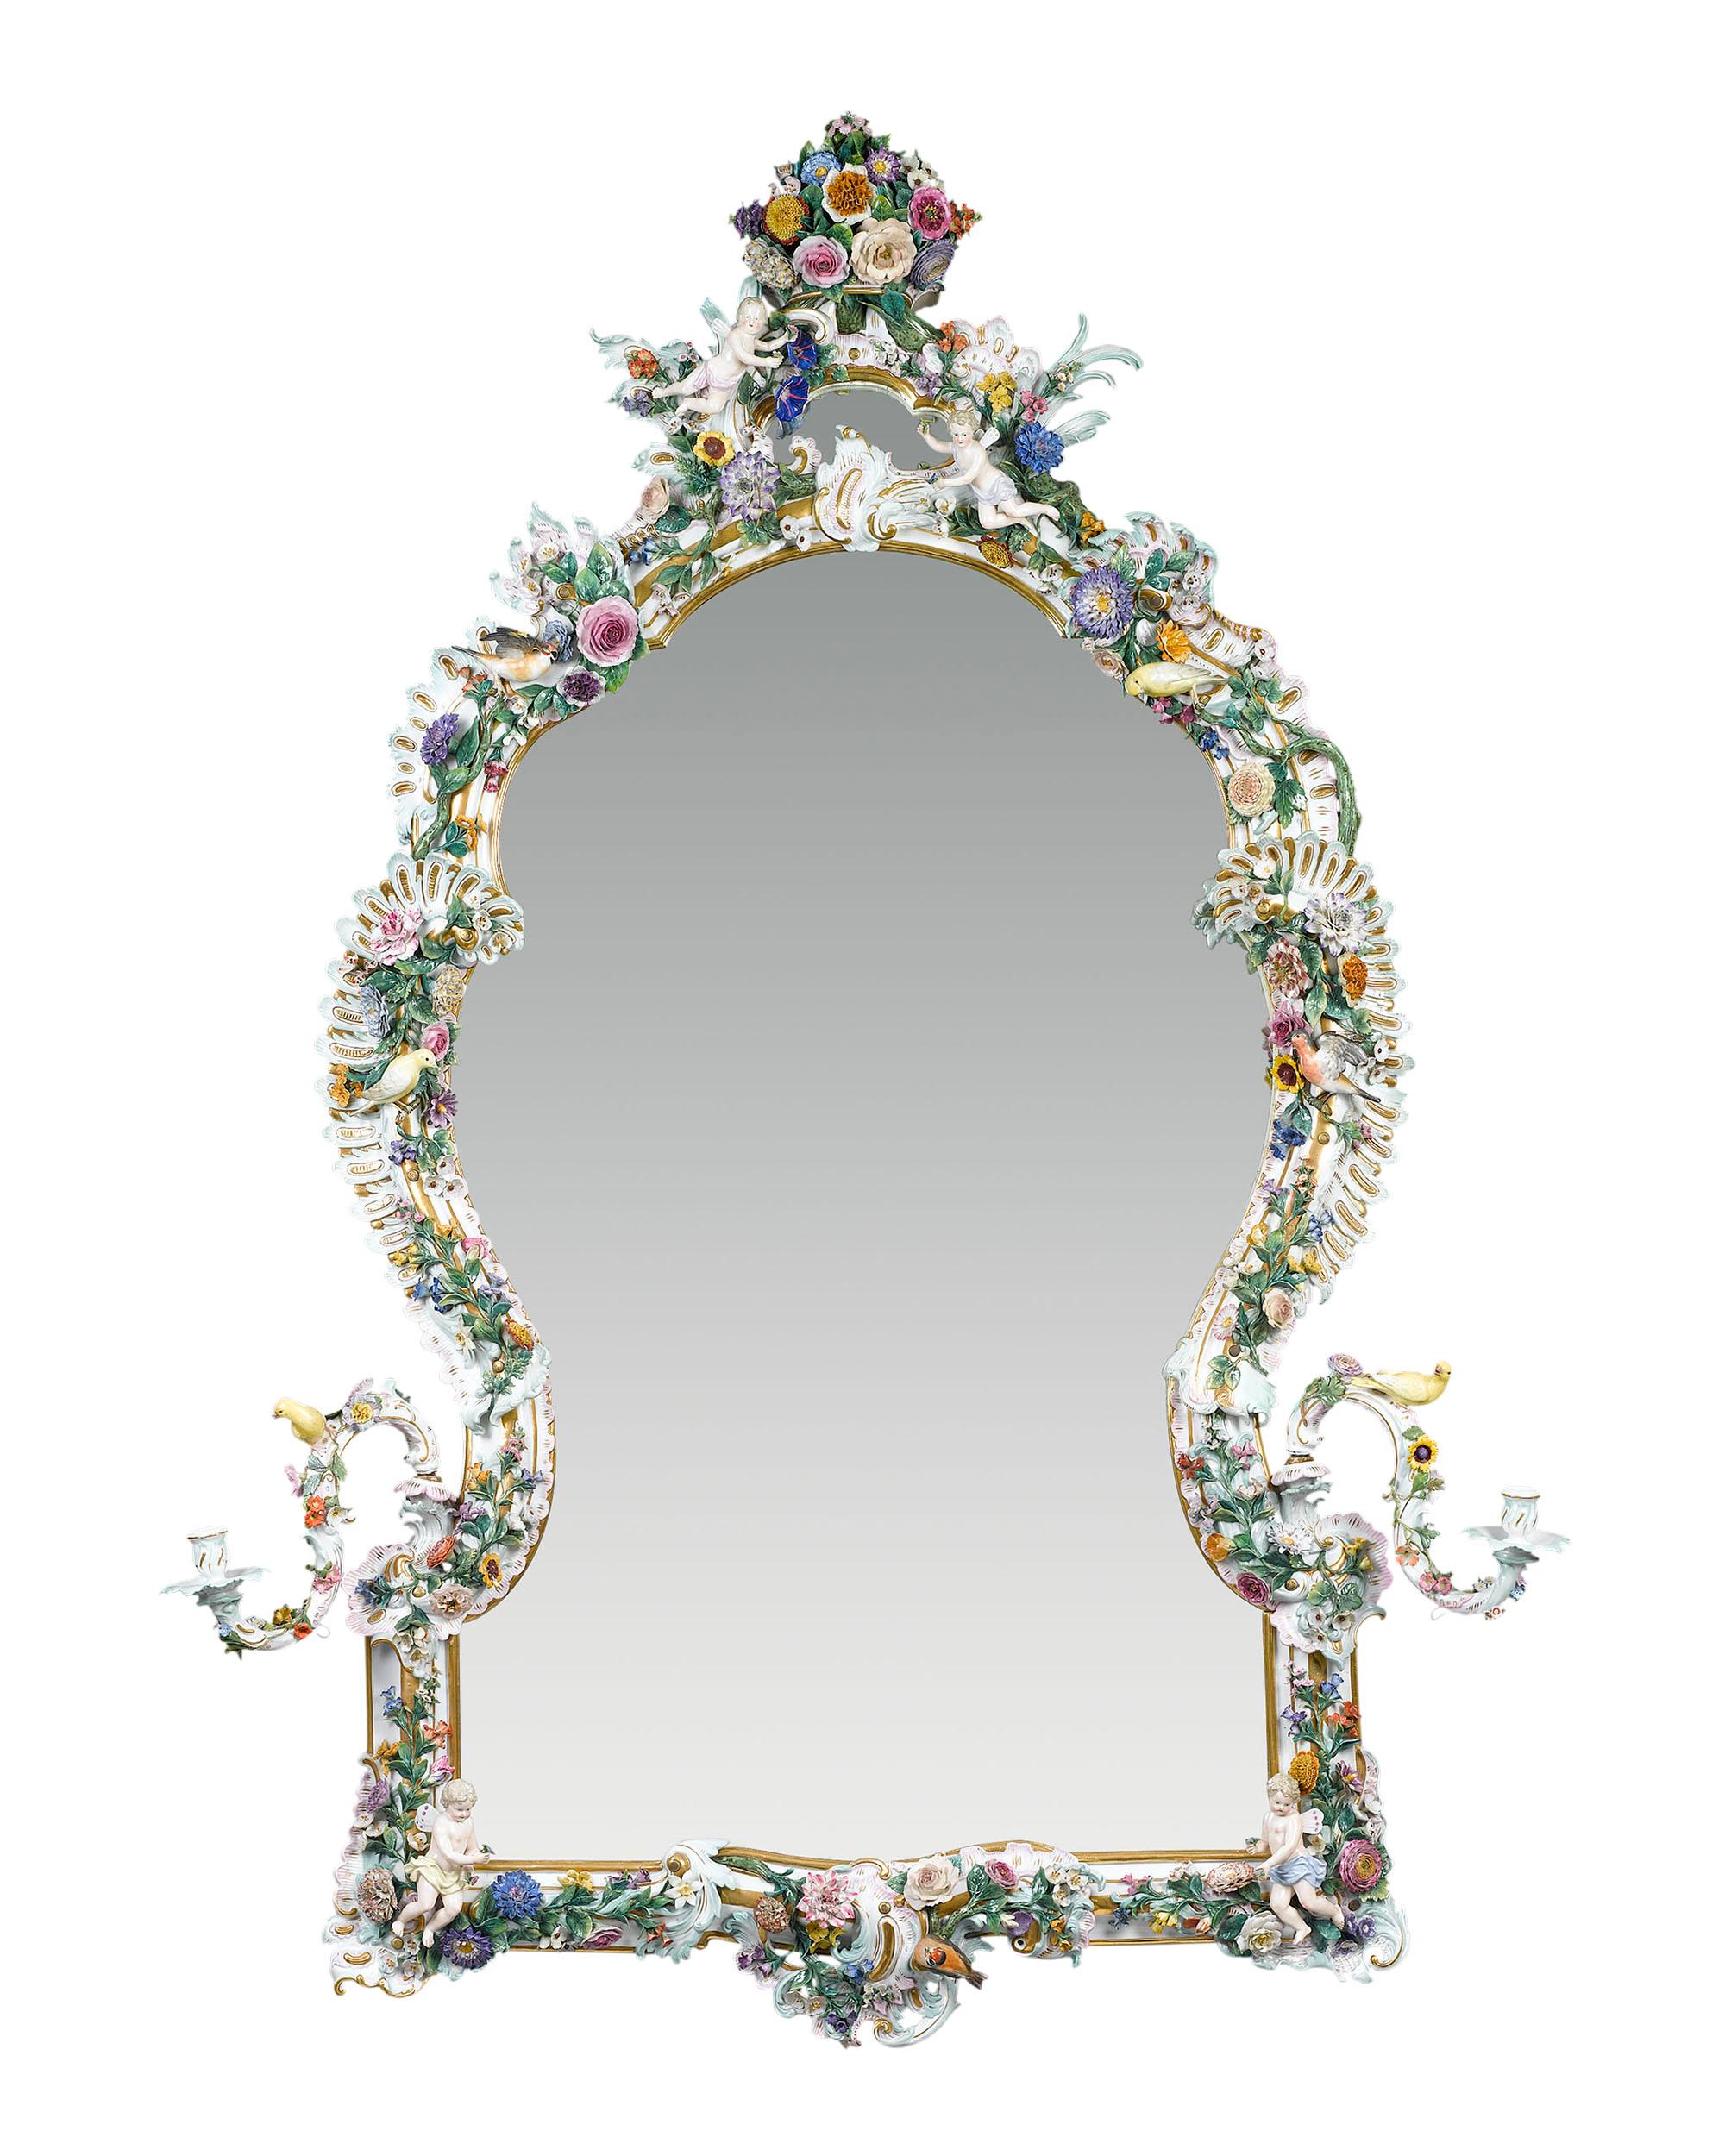 This sumptuous Meissen porcelain mirror is a work of astounding artistry and rarity that would only have been created for the most affluent clients. Exquisitely hand-painted in polychrome with gilt accents, the bountiful frame is adorned with all